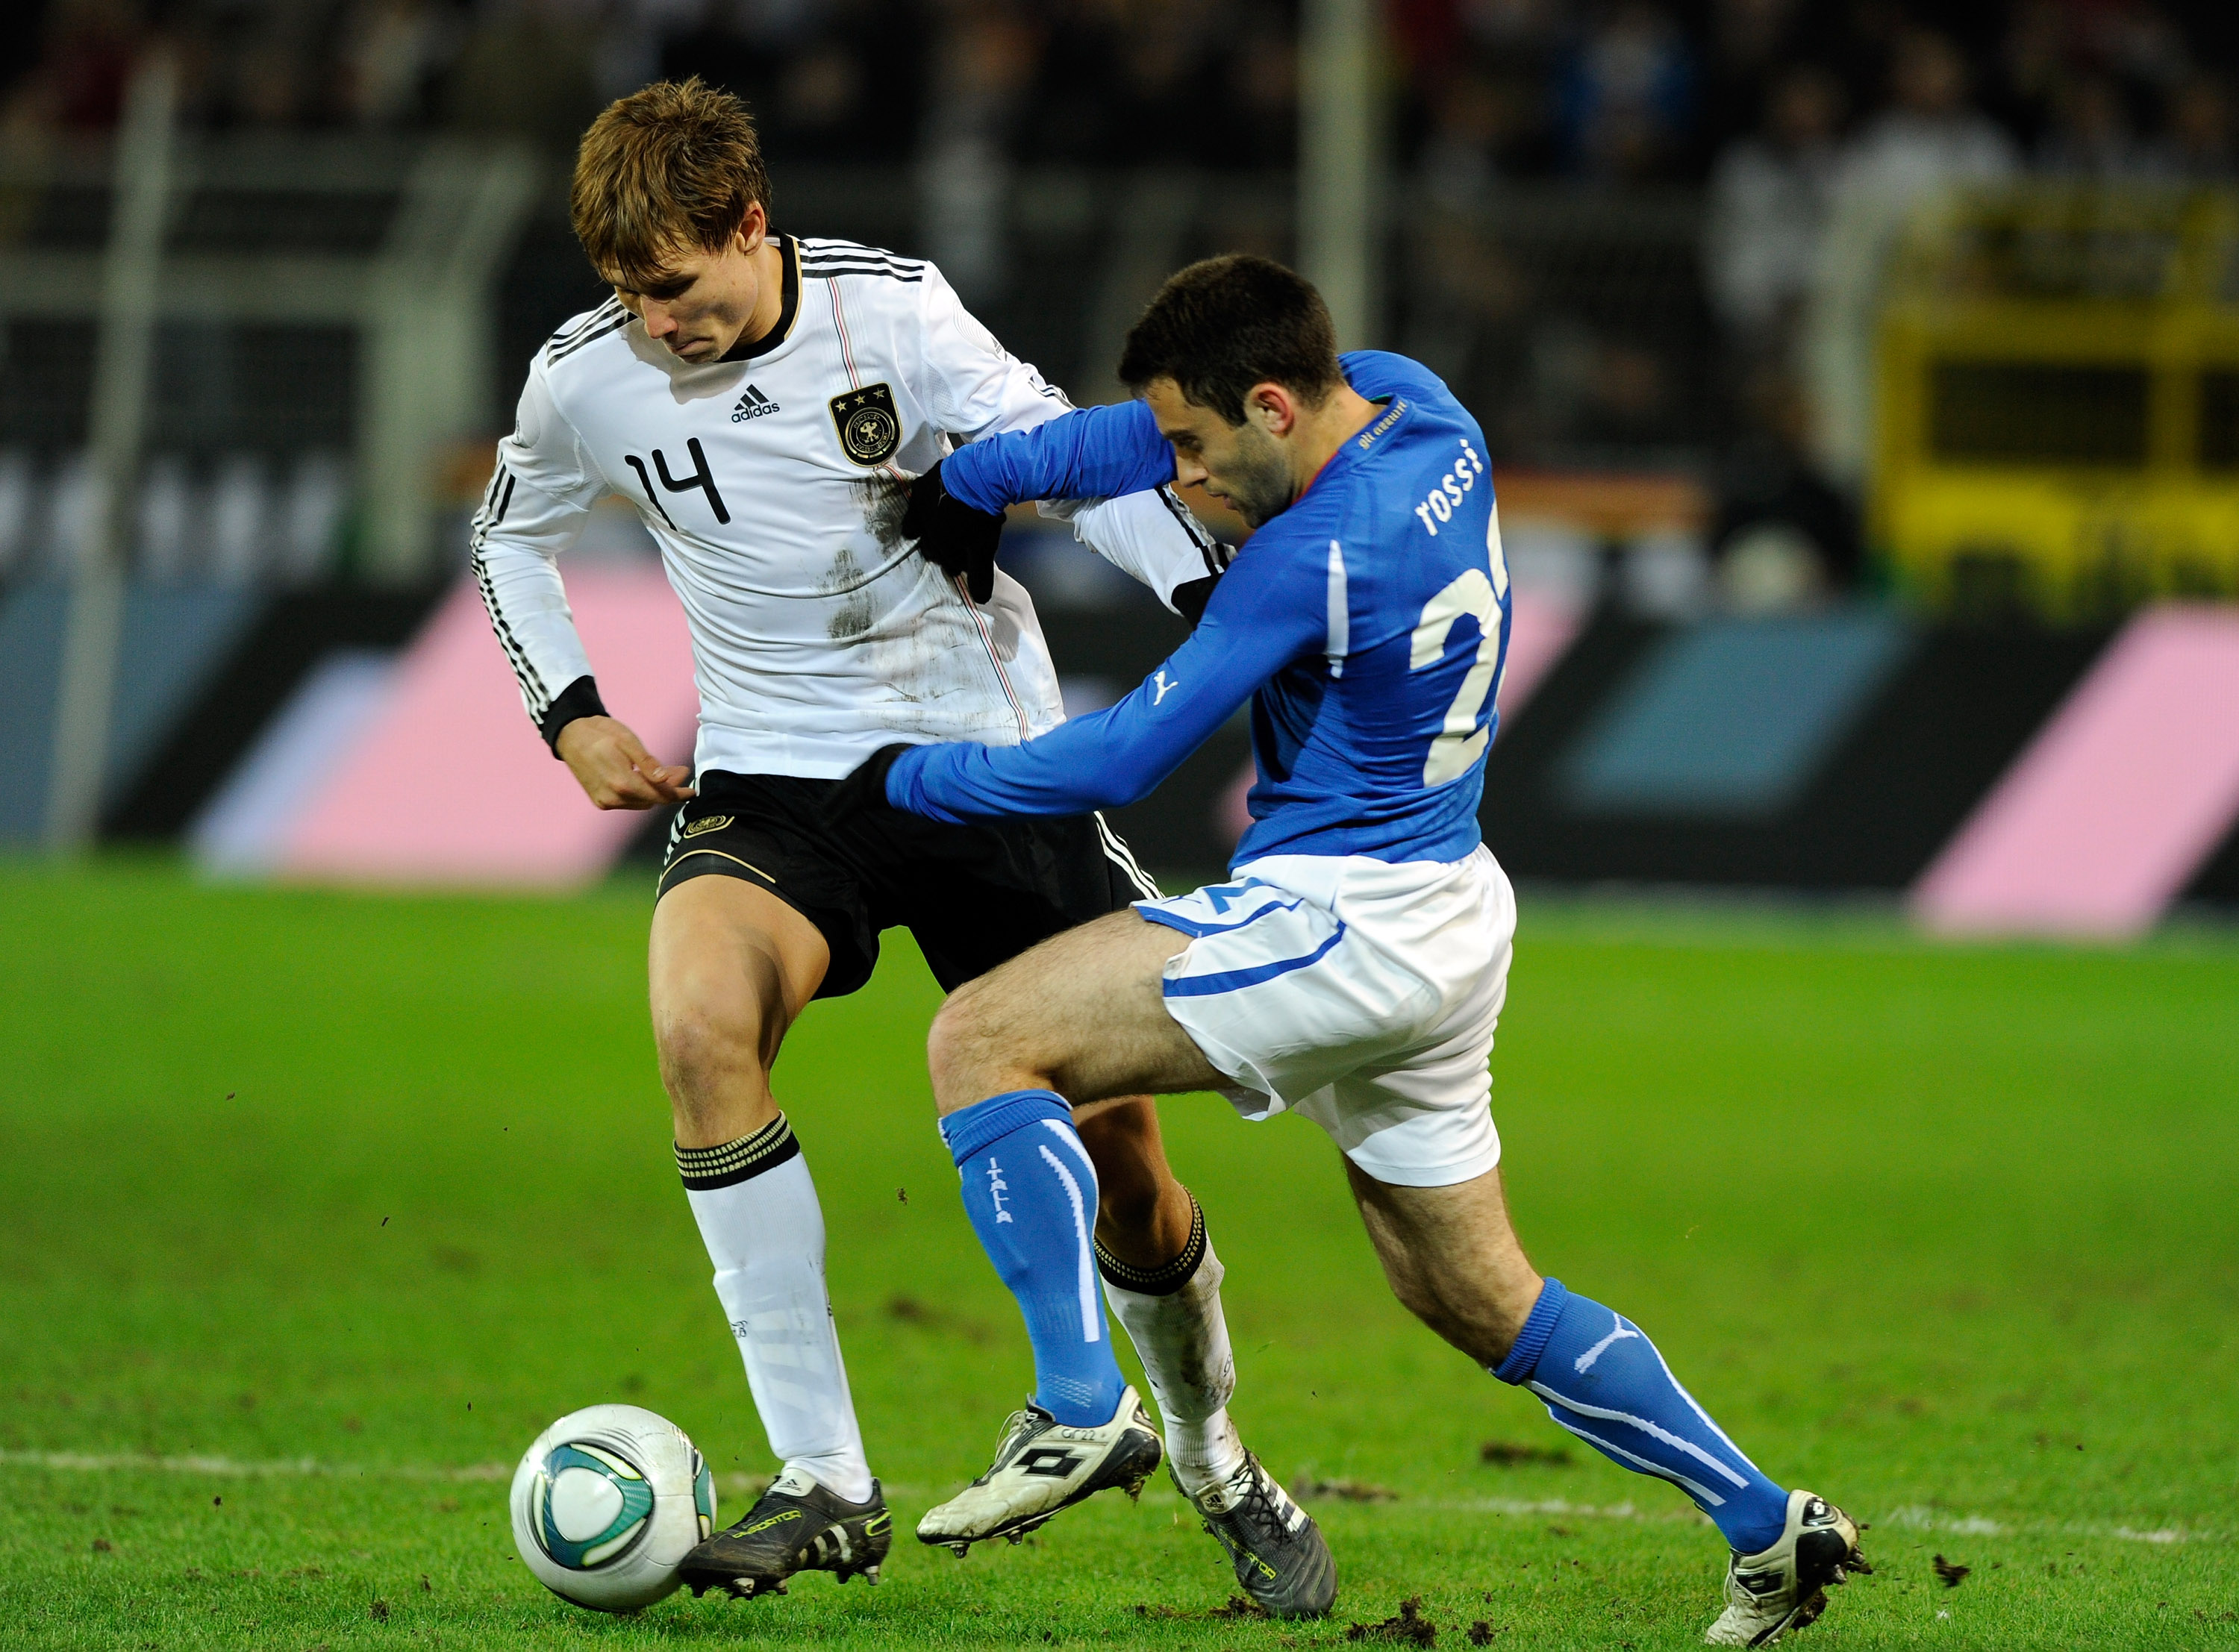 DORTMUND, GERMANY - FEBRUARY 09:  Giuseppe Rossi of Italy and Holger Badstuber of Germany compete for the ball during the International Friendly match between Germany and Italy on February 9, 2011 in Dortmund, Germany.  (Photo by Claudio Villa/Getty Image